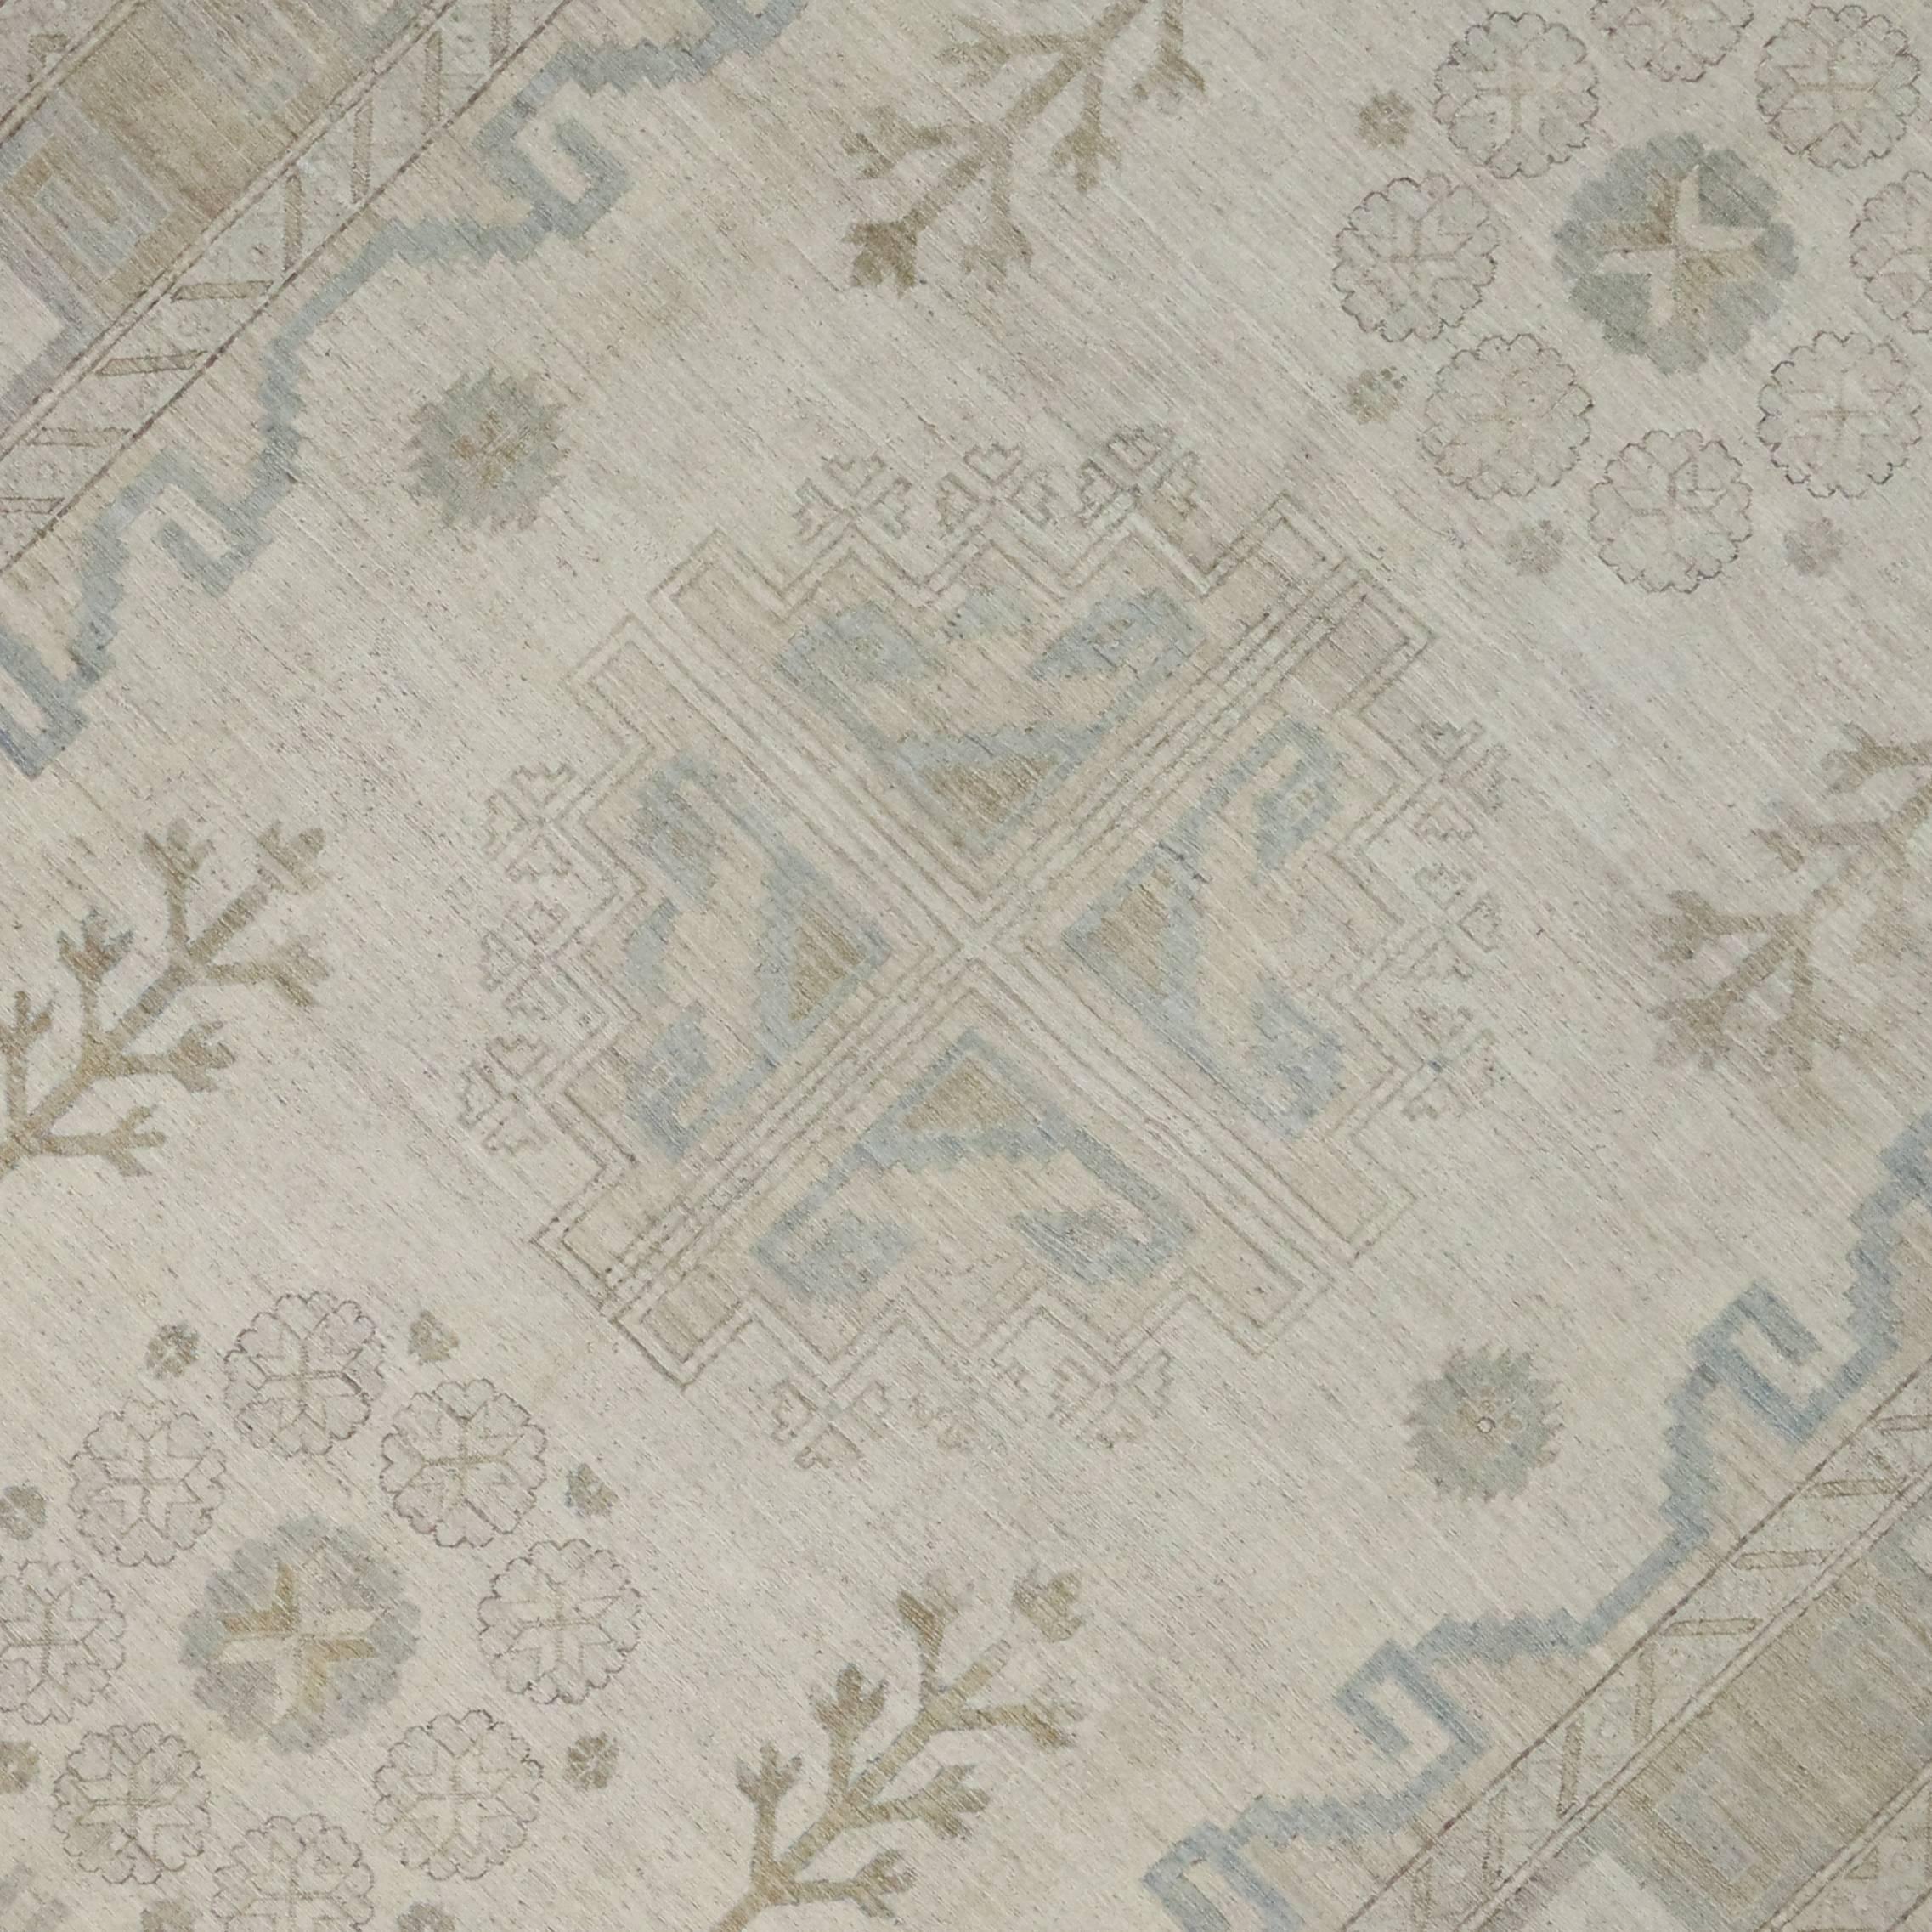 New Transitional Area Rug with Khotan Design in Warm, Neutral Colors 1